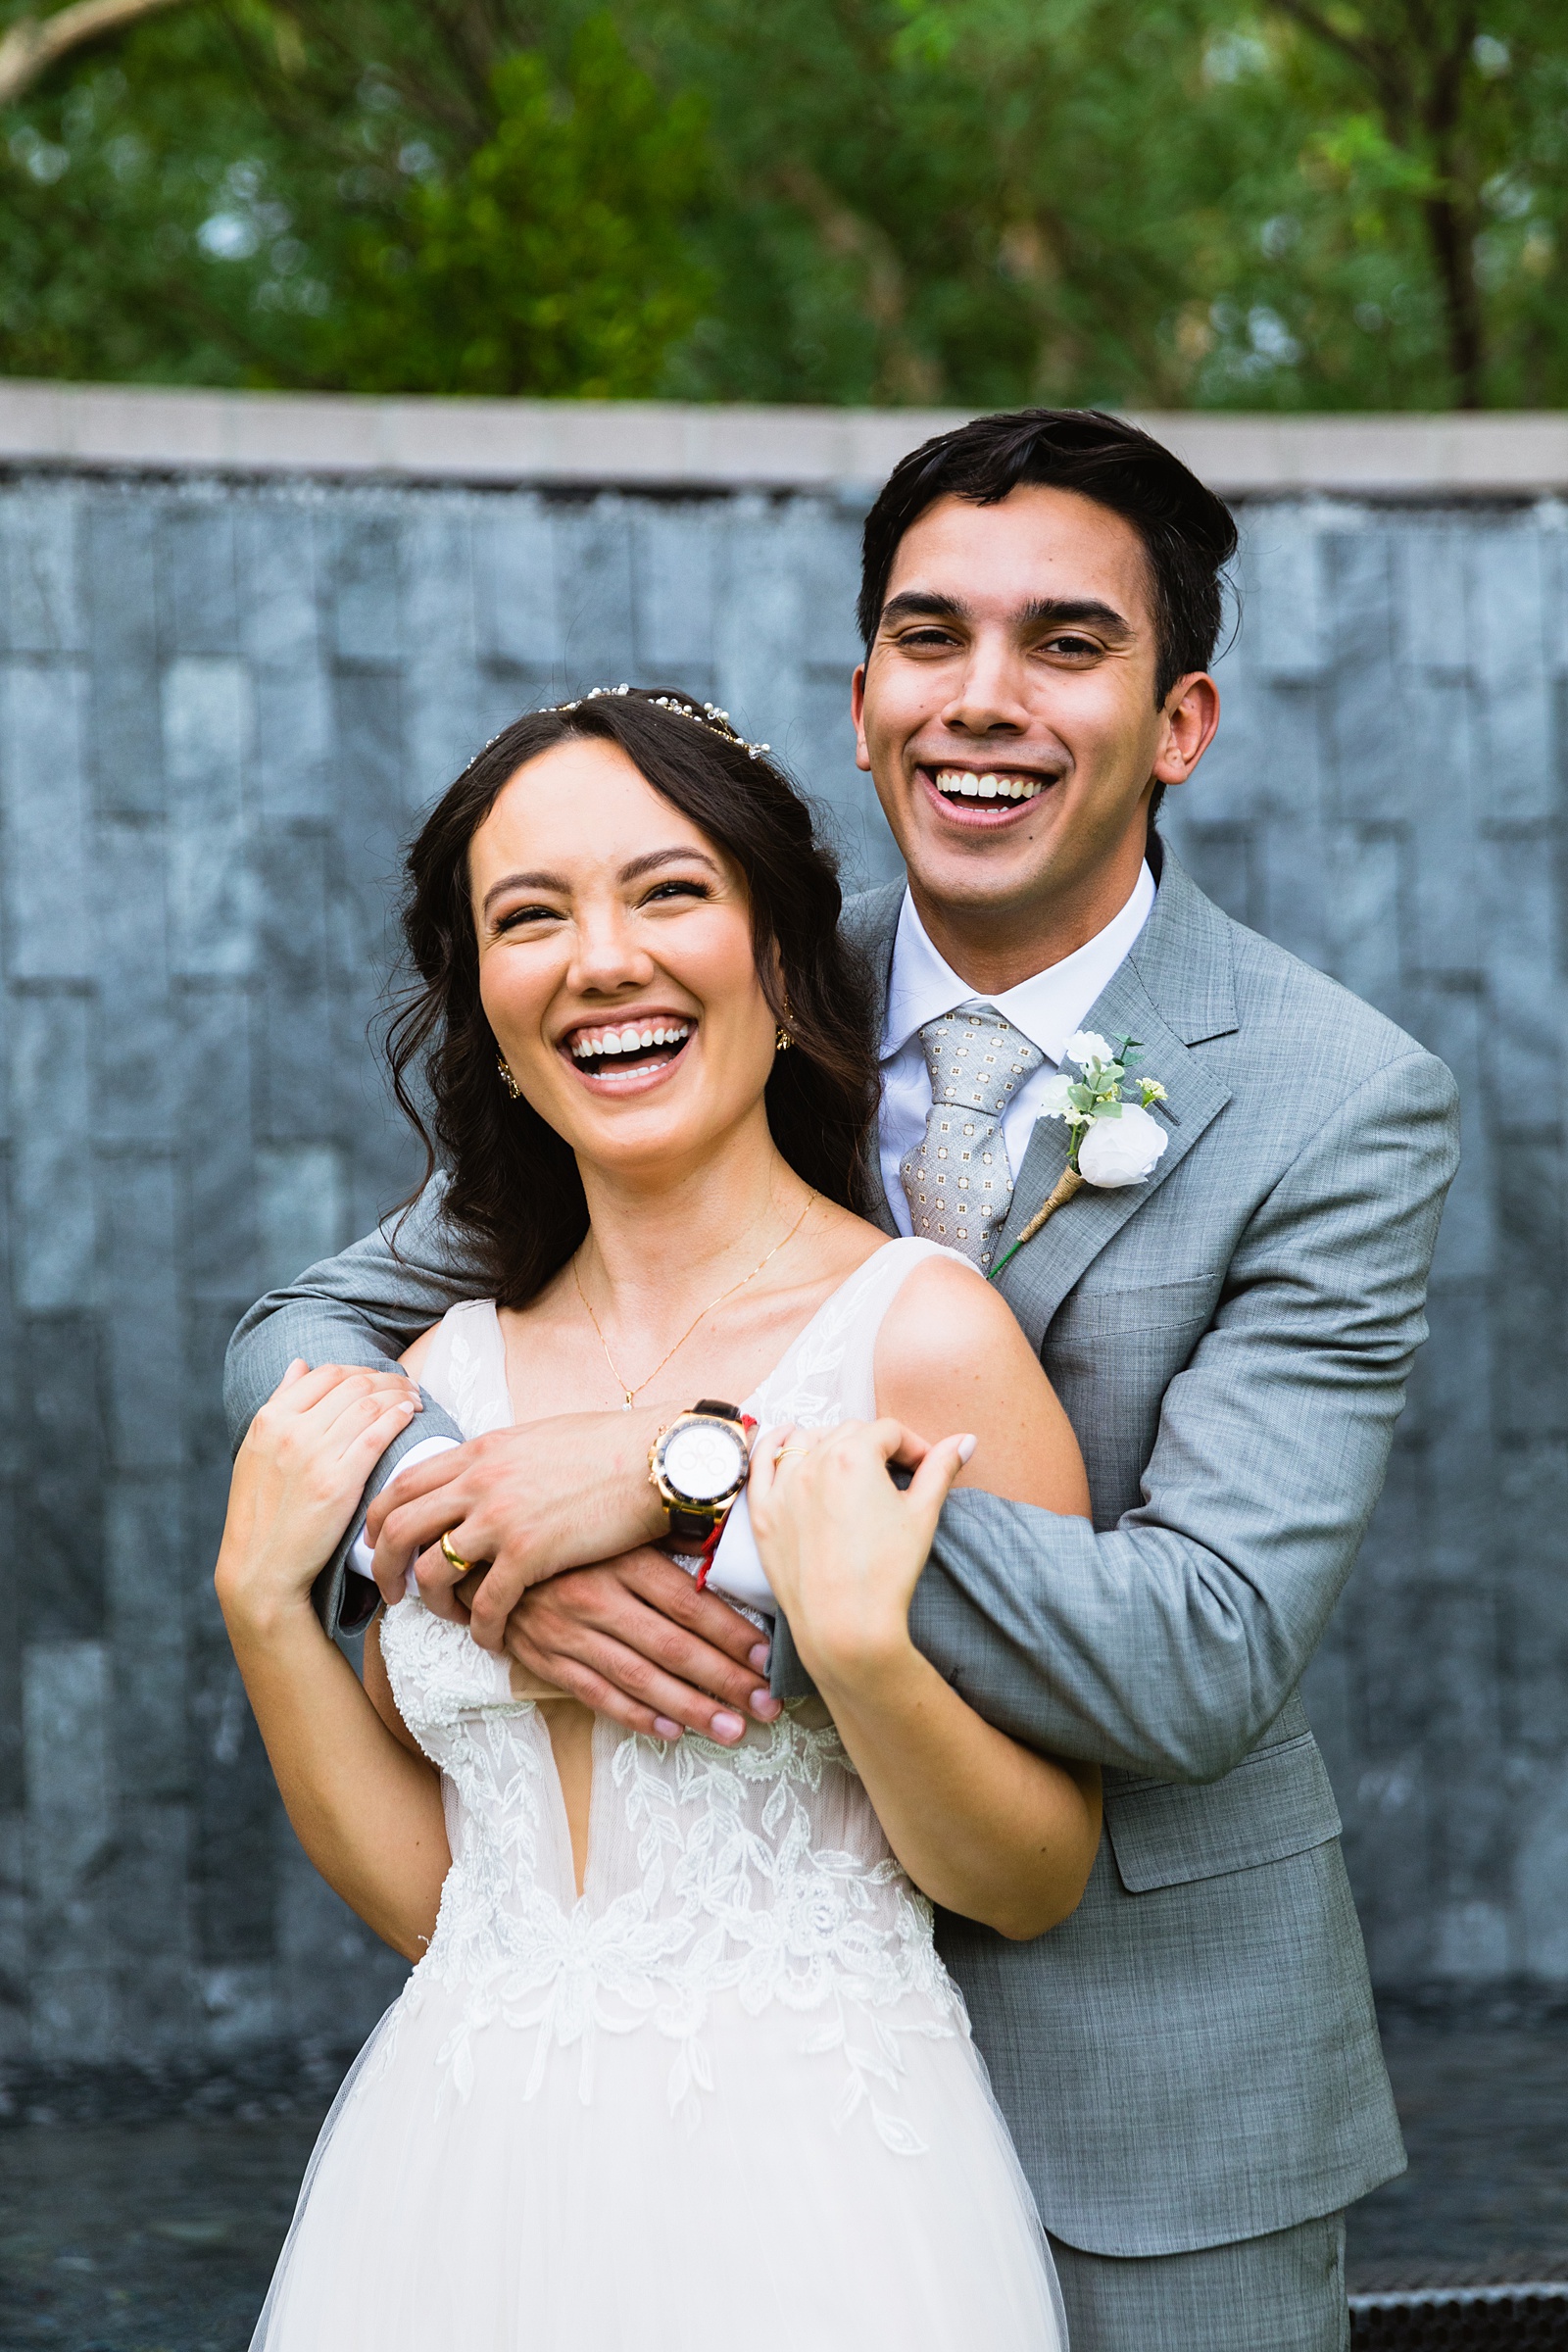 Bride and groom laughing together during their Hyatt Regency Scottsdale Resort & Spa At Gainey Ranch wedding by Scottdsale wedding photographer PMA Photography.